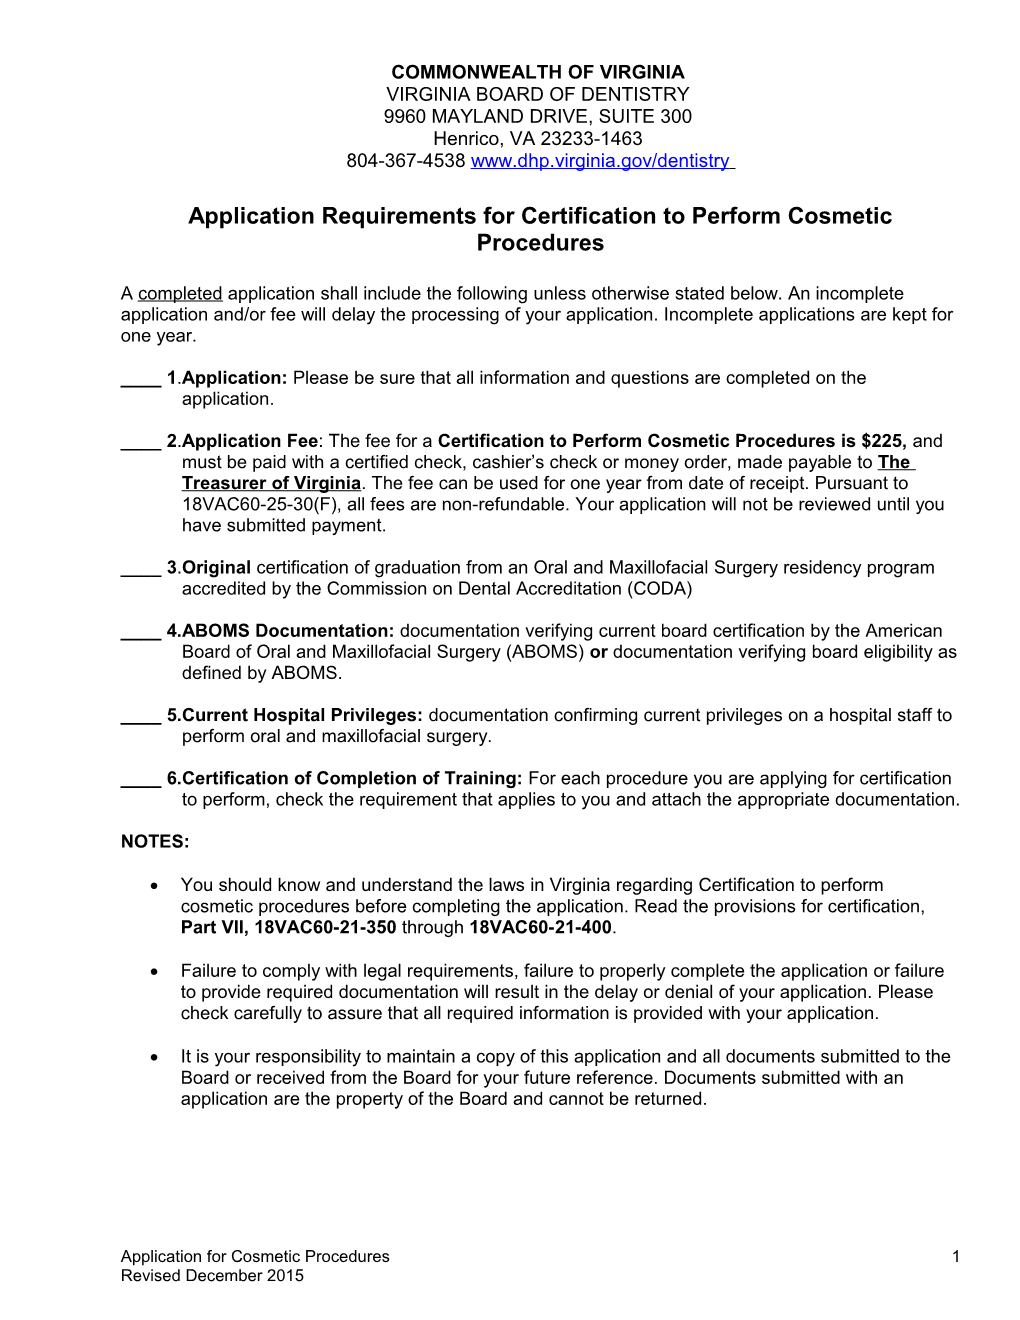 Application for Certification to Perform Cosmetic Procedures